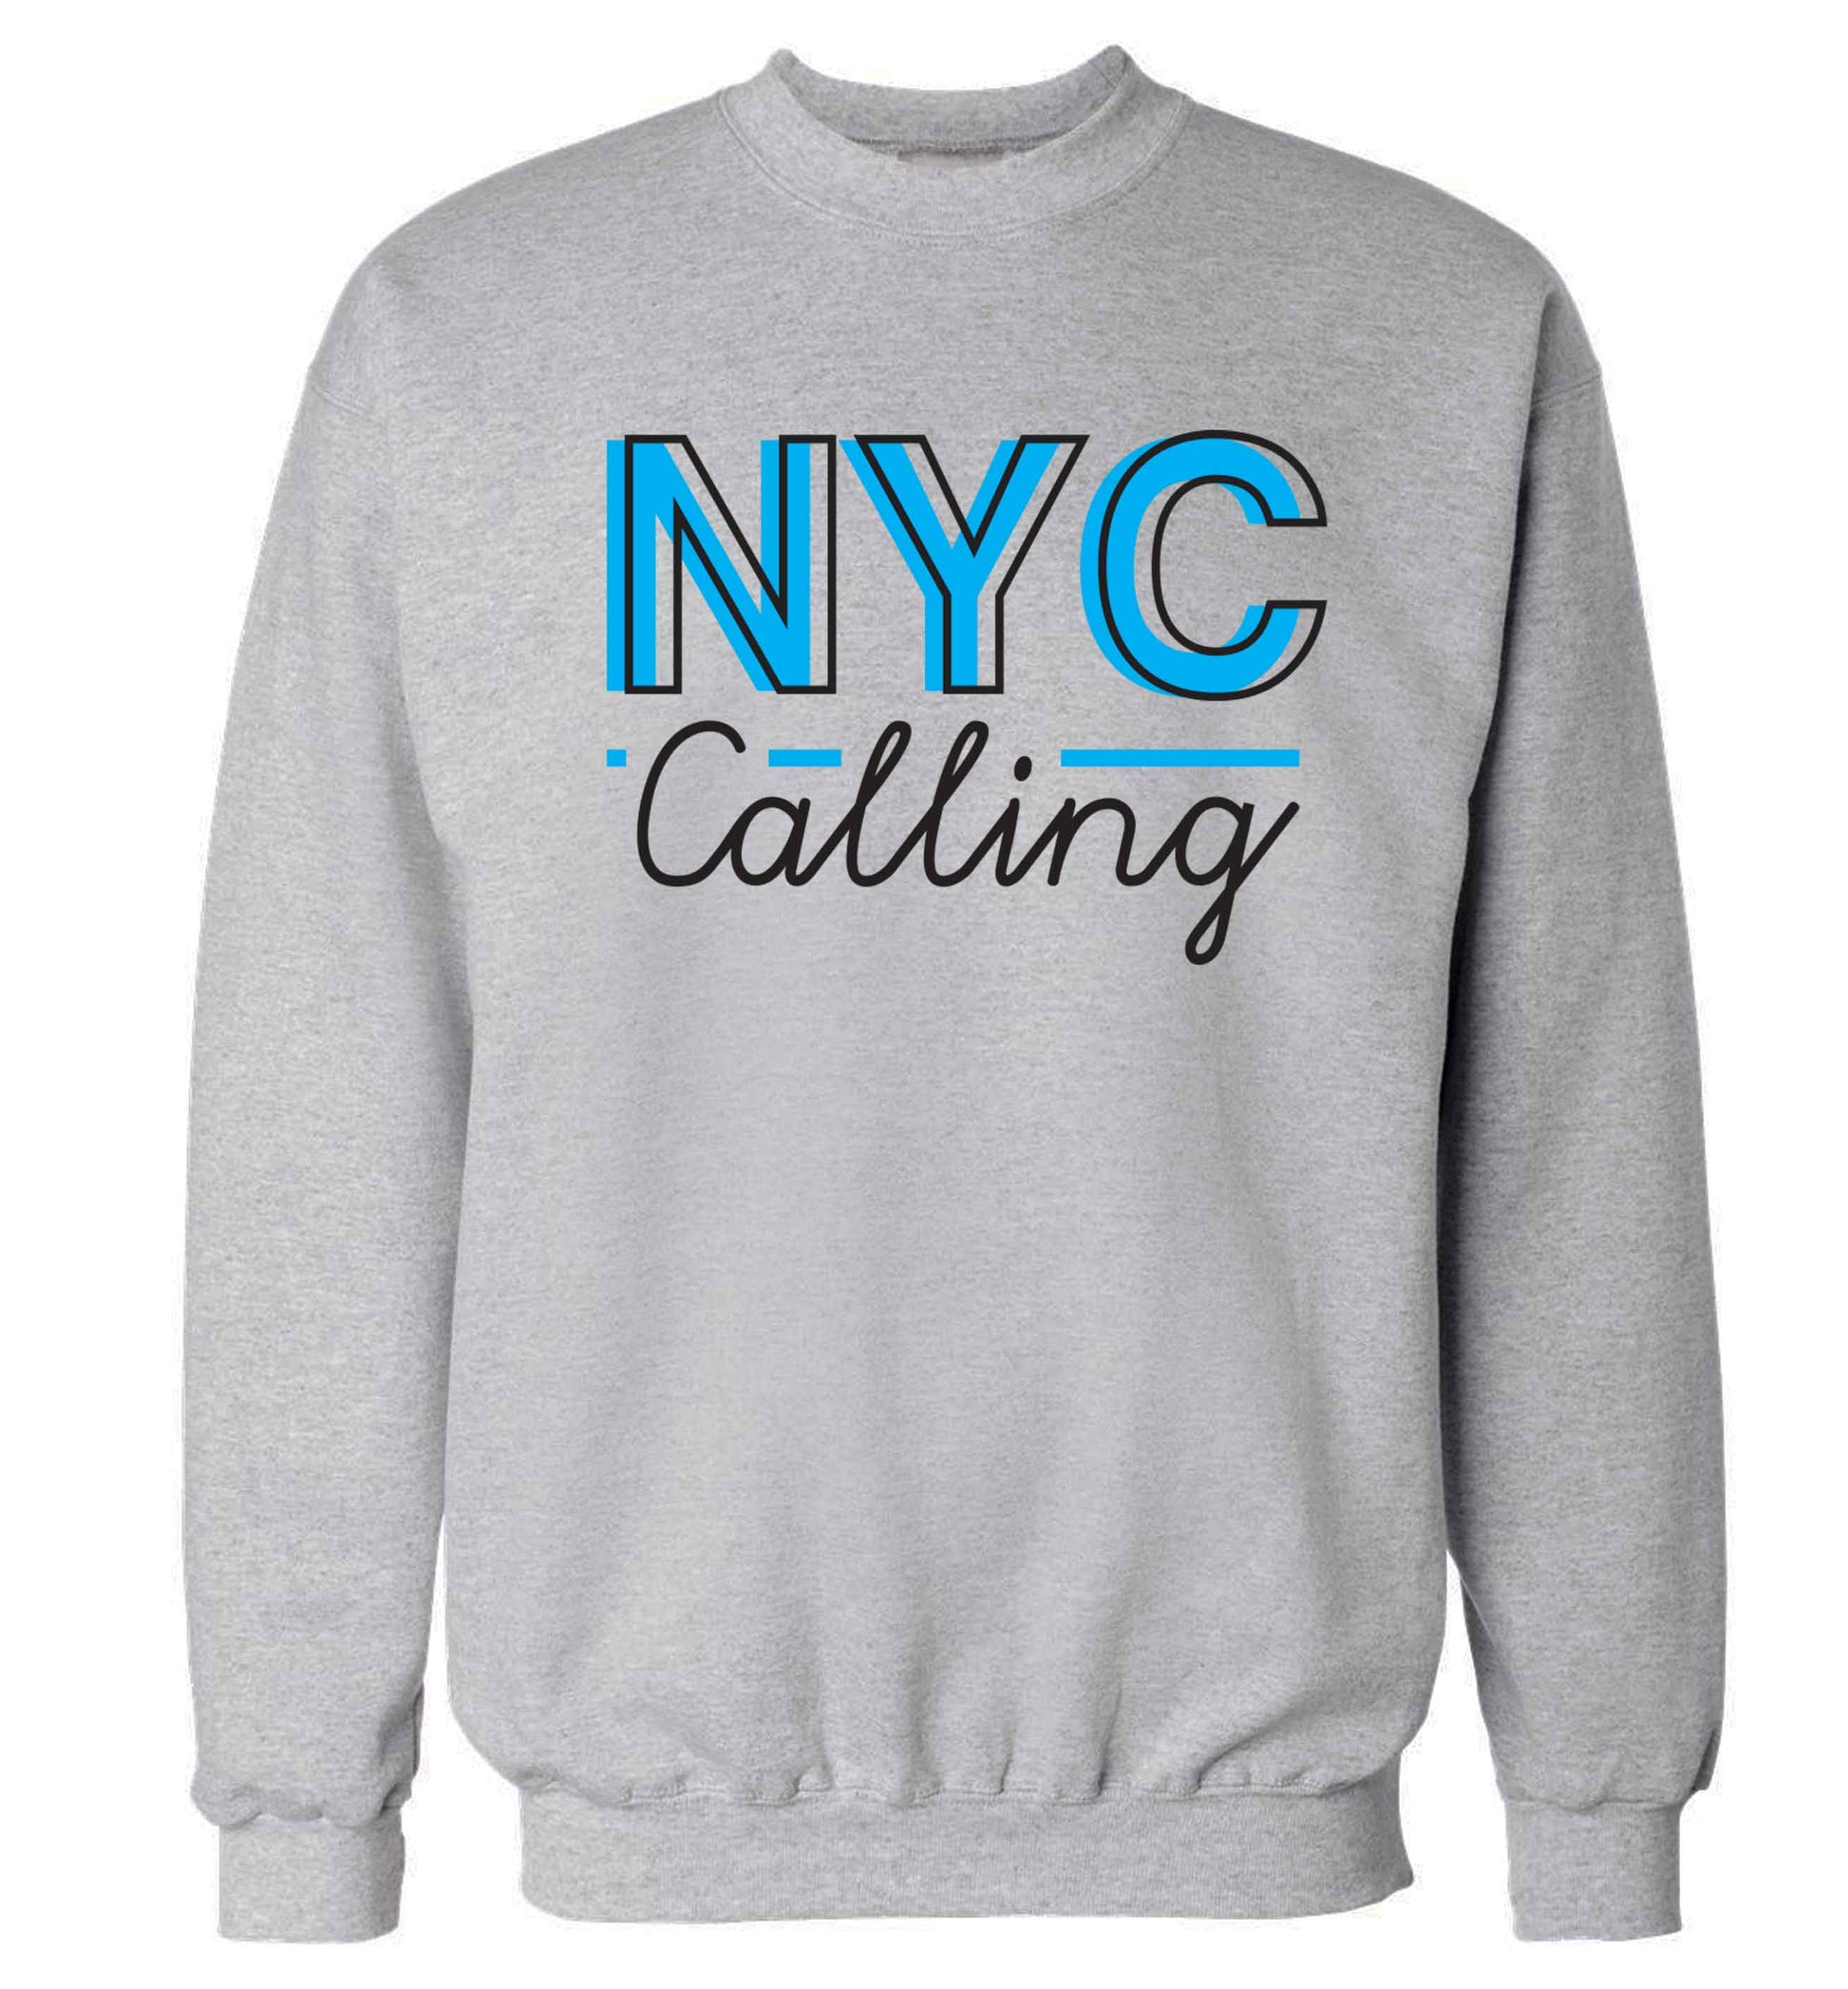 NYC calling Adult's unisex grey Sweater 2XL